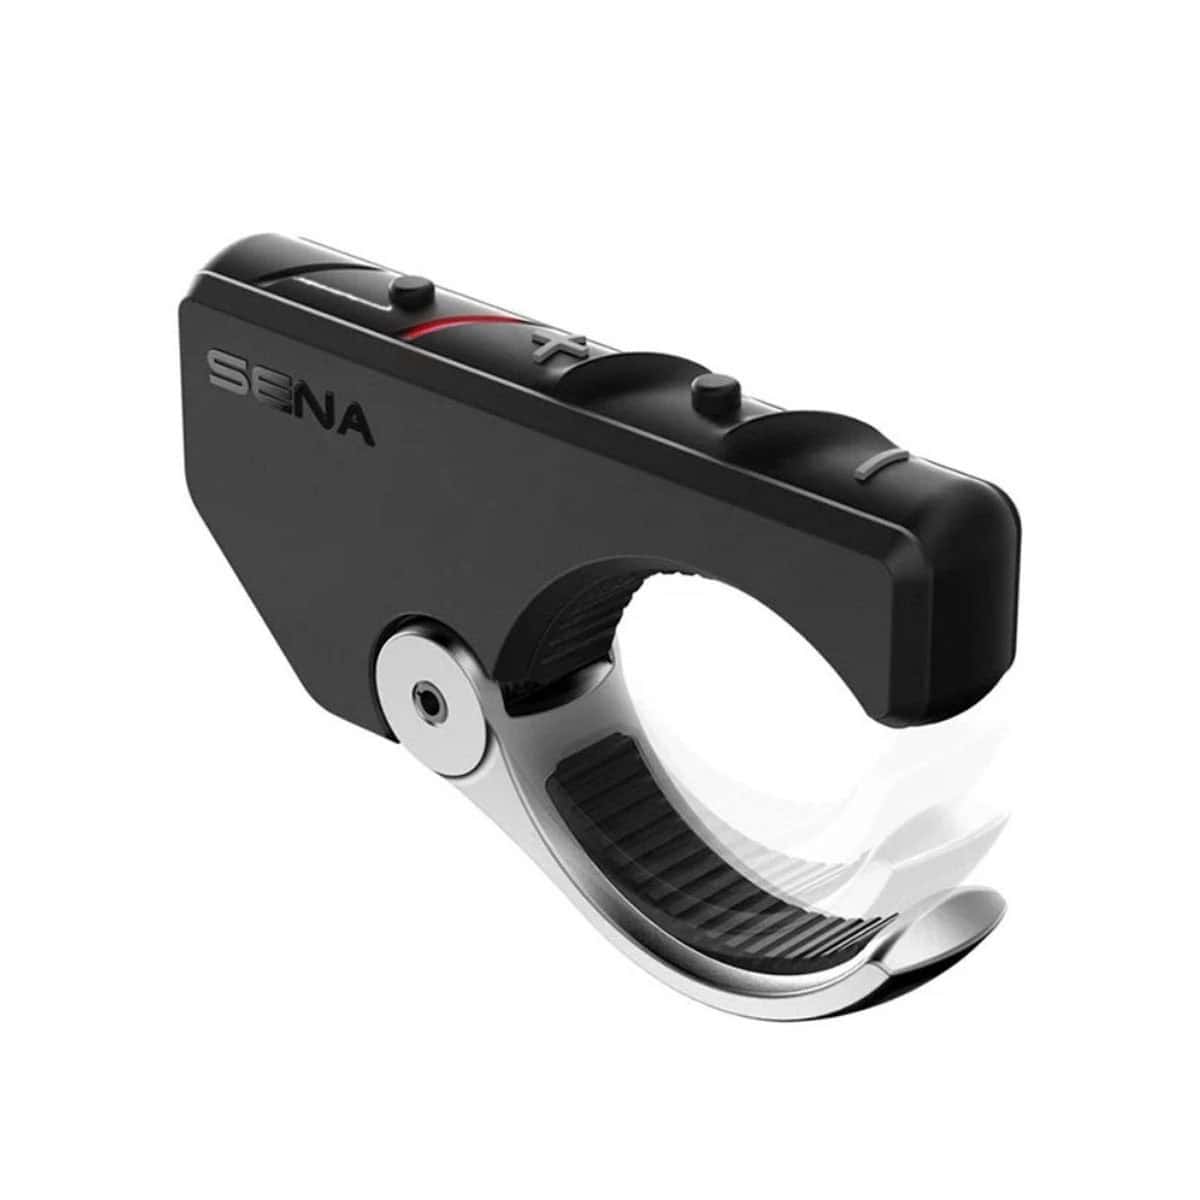 Control your Sena Bluetooth Headset with the Sena RC4 4-Button Handlebar Remote Control, right from your handlebars